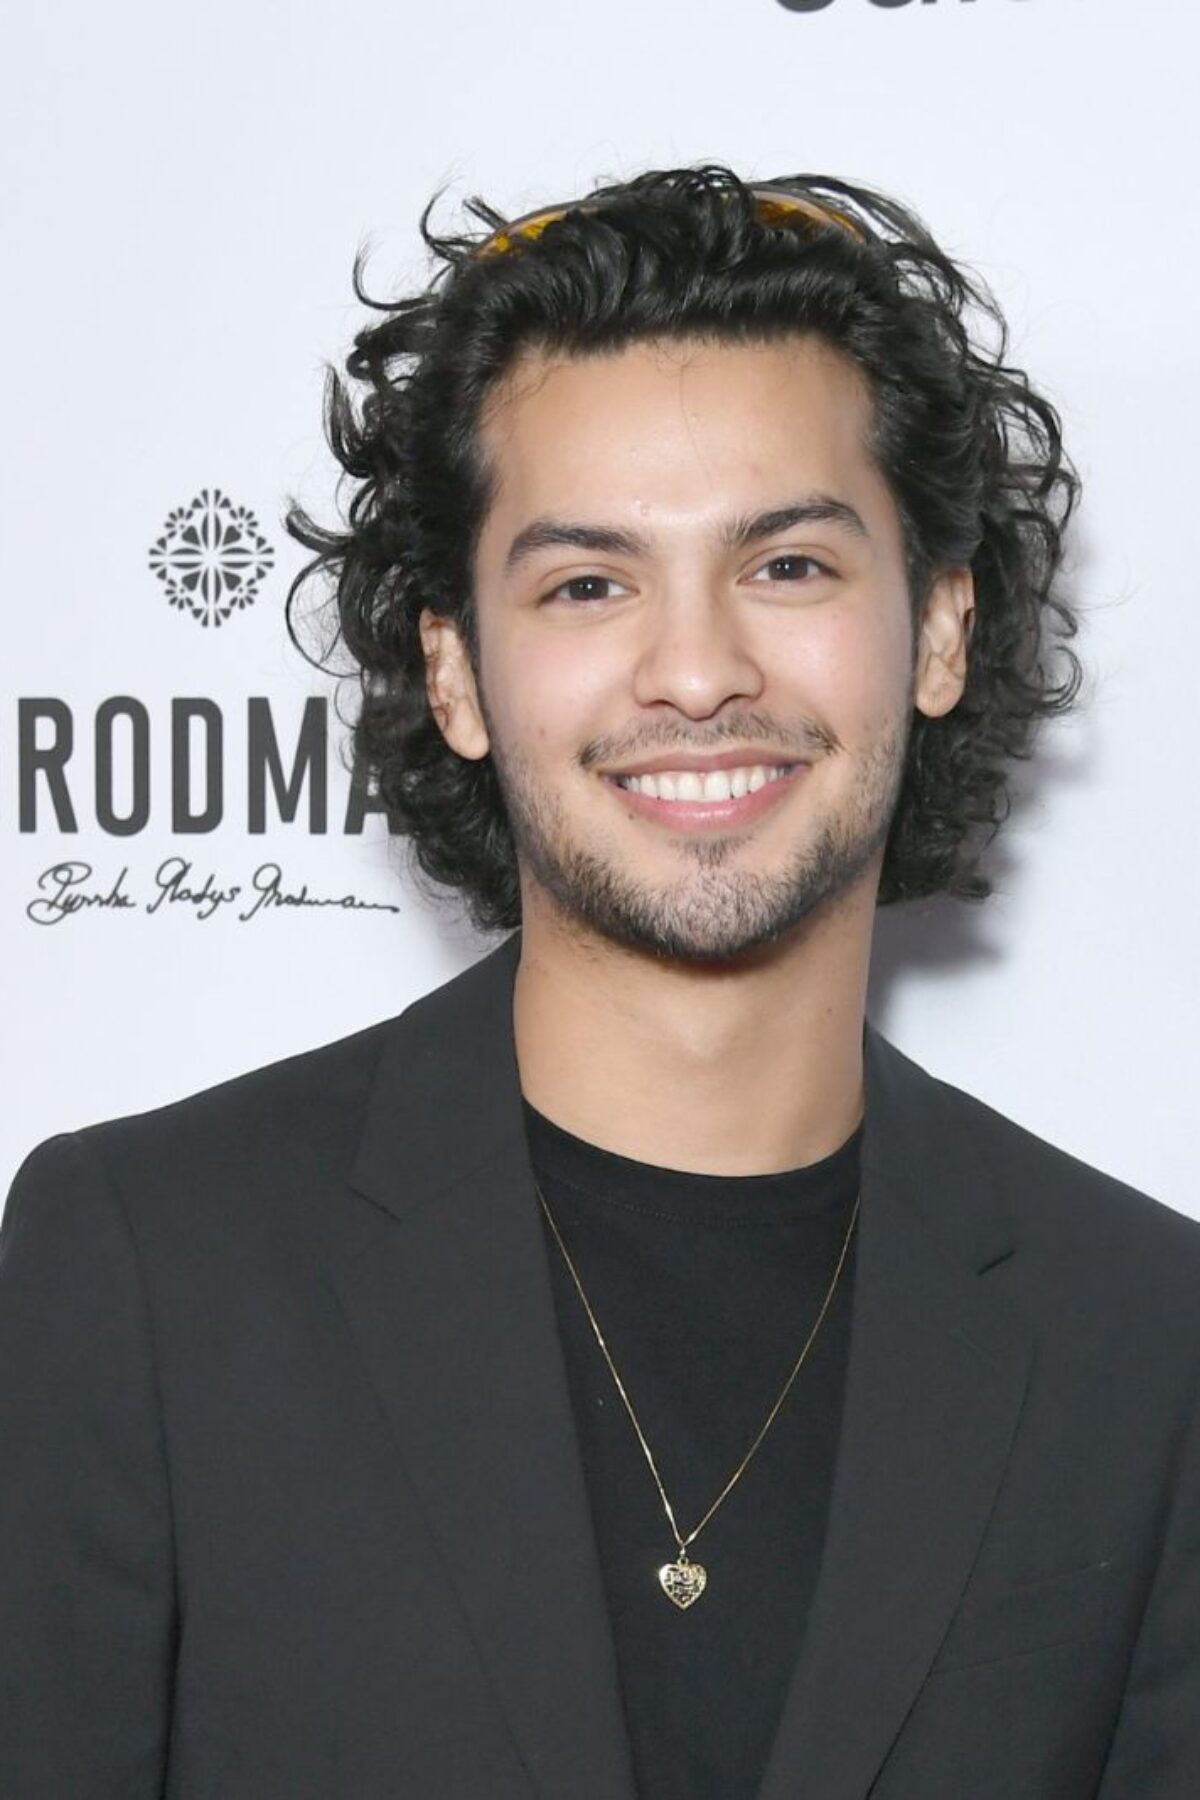 LOS ANGELES, CALIFORNIA - SEPTEMBER 29: Xolo Maridueña attends the 12th Edition of the GuadaLAjara Film Festival opening night at The Theatre at Ace Hotel on September 29, 2022 in Los Angeles, California. (Photo by JC Olivera/Getty Images)